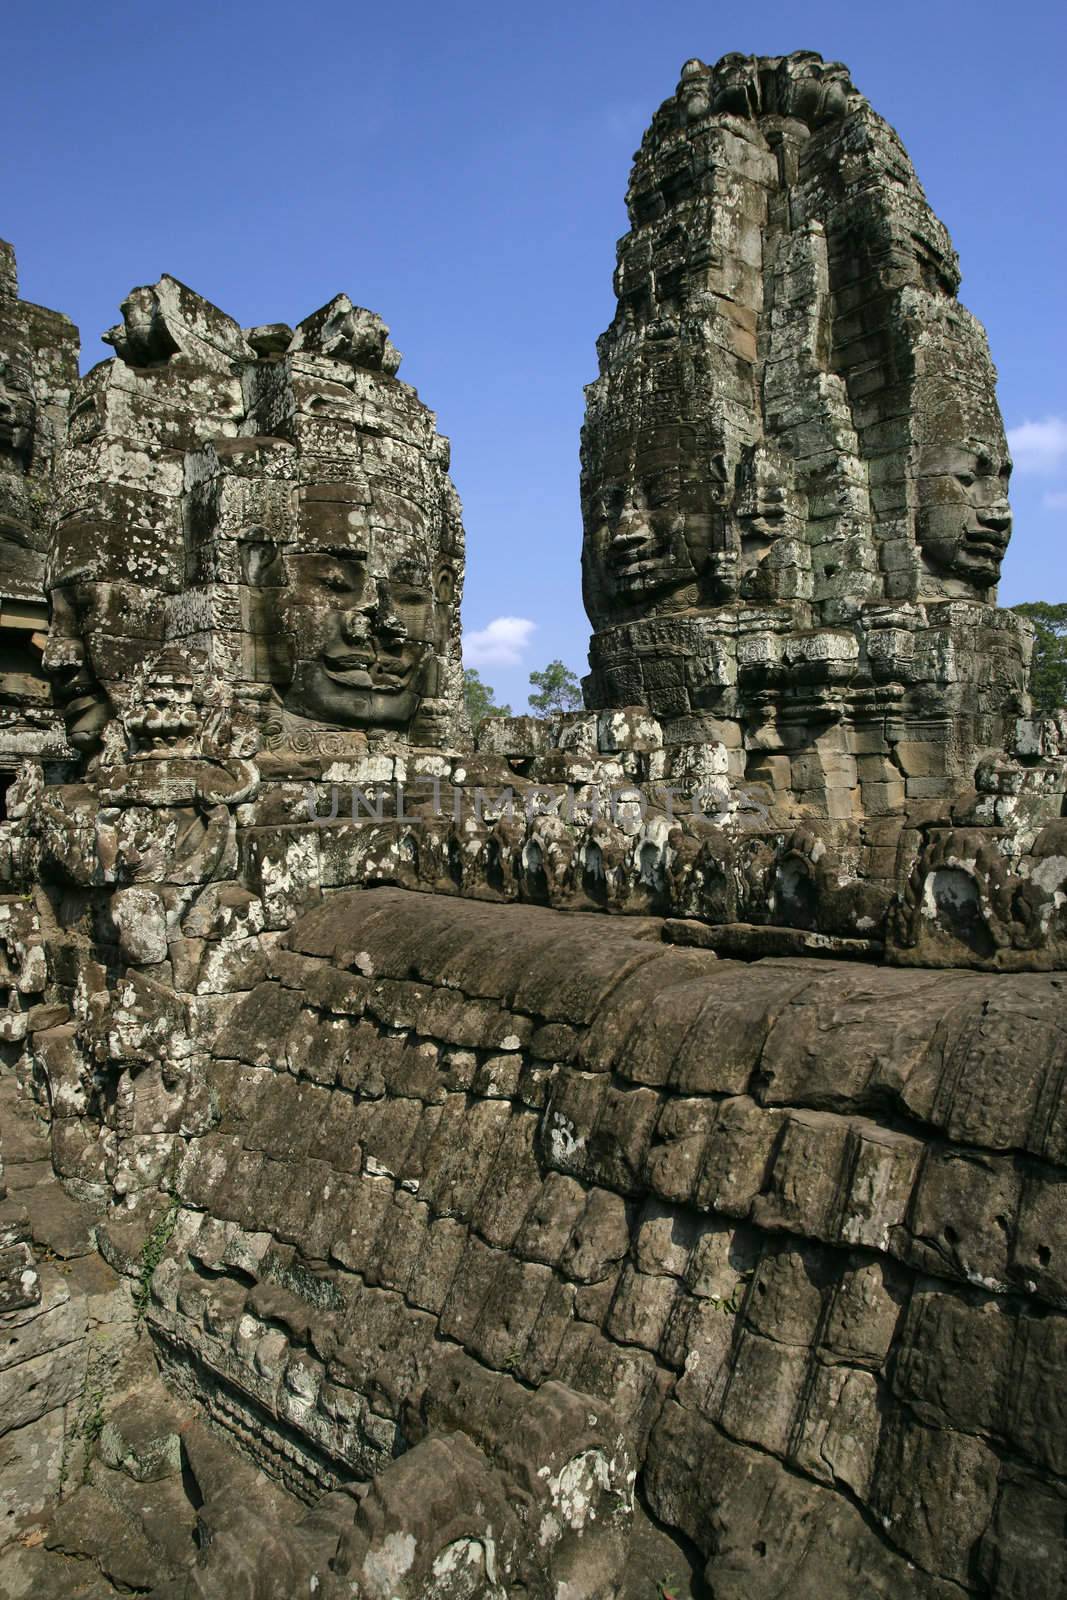 Section of the vast Temples of Angkor in Cambodia.
